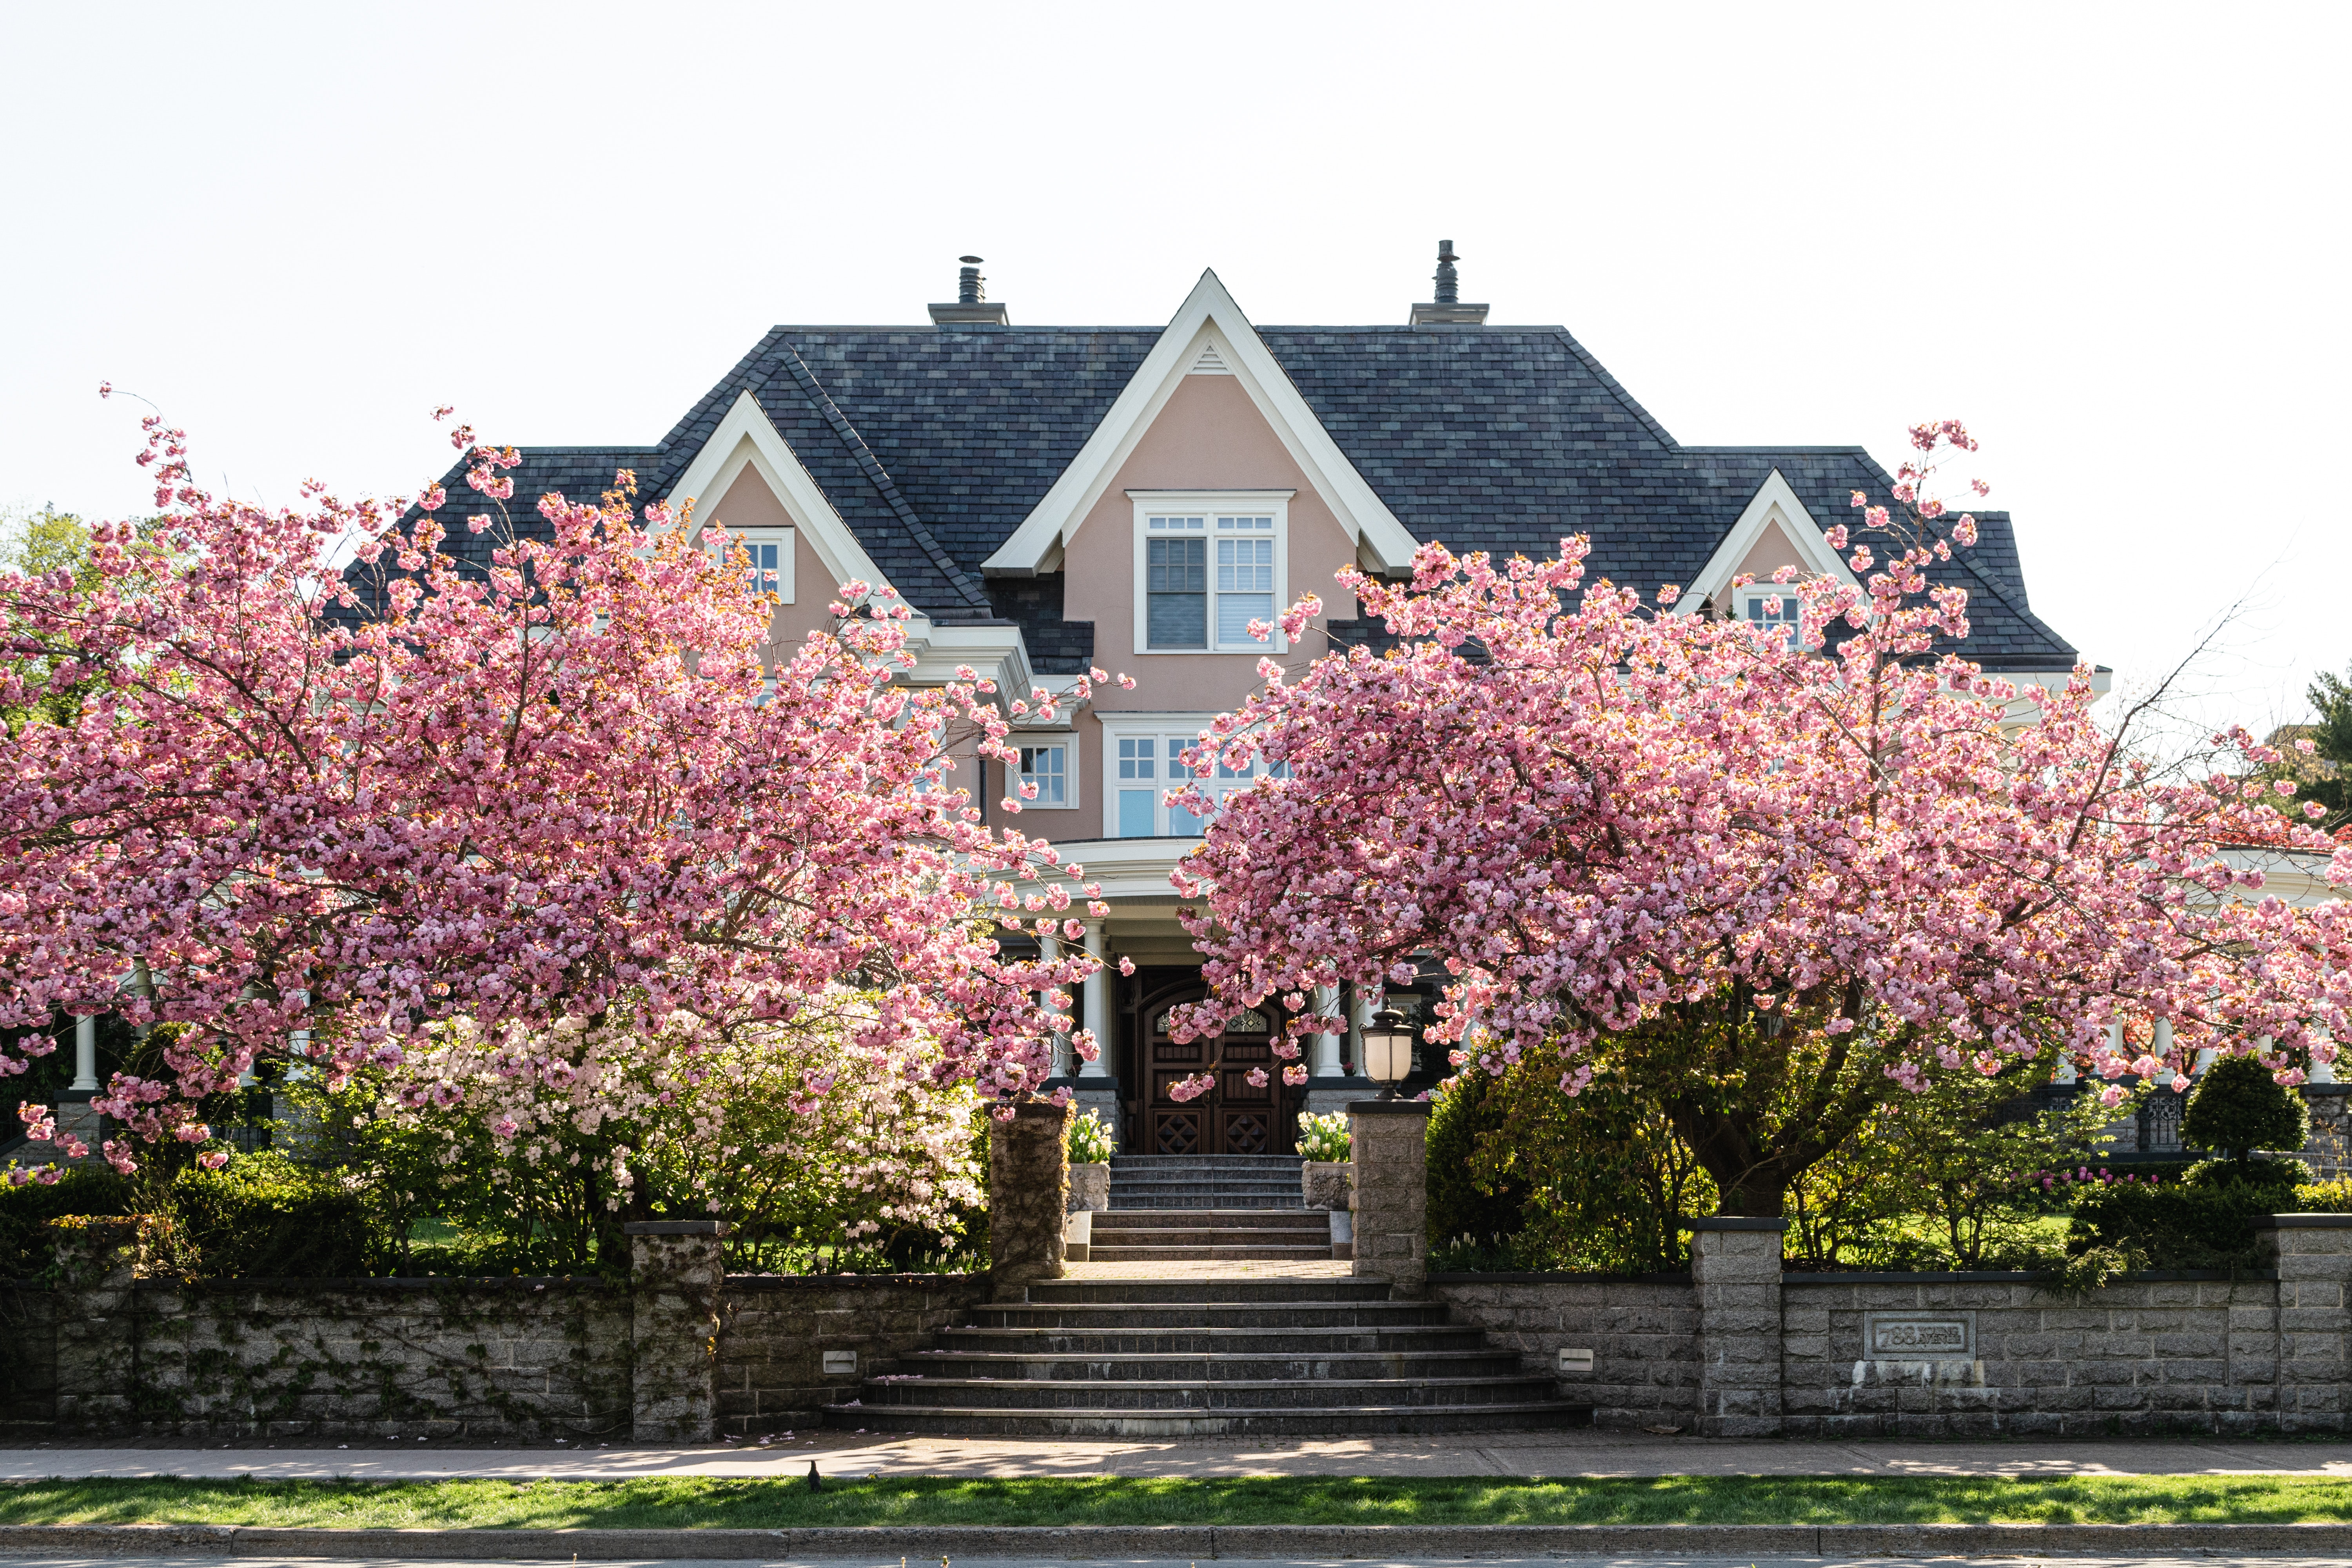 Boost Your Home’s Curb Appeal with Expert Guidance